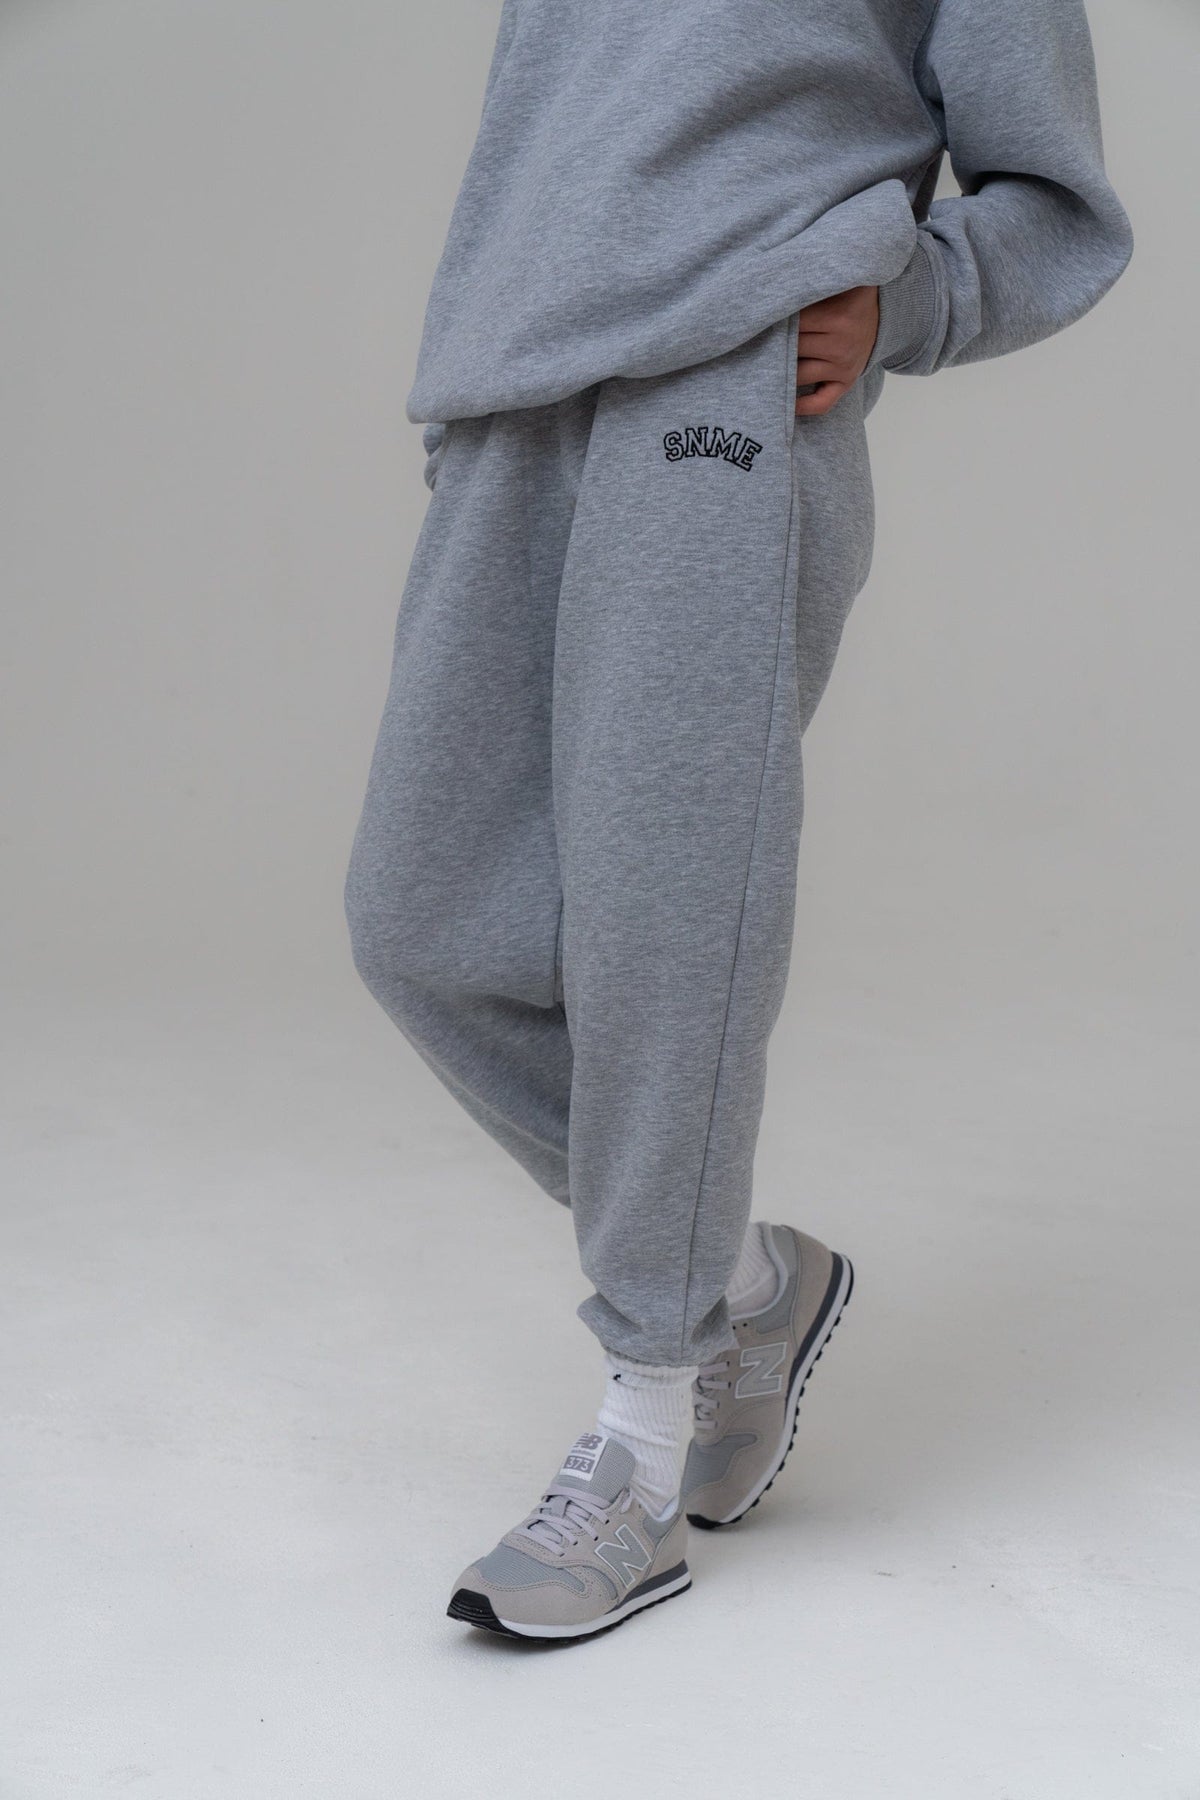 SIANMARIE Baggy Retro Joggers - Grey Track Pant